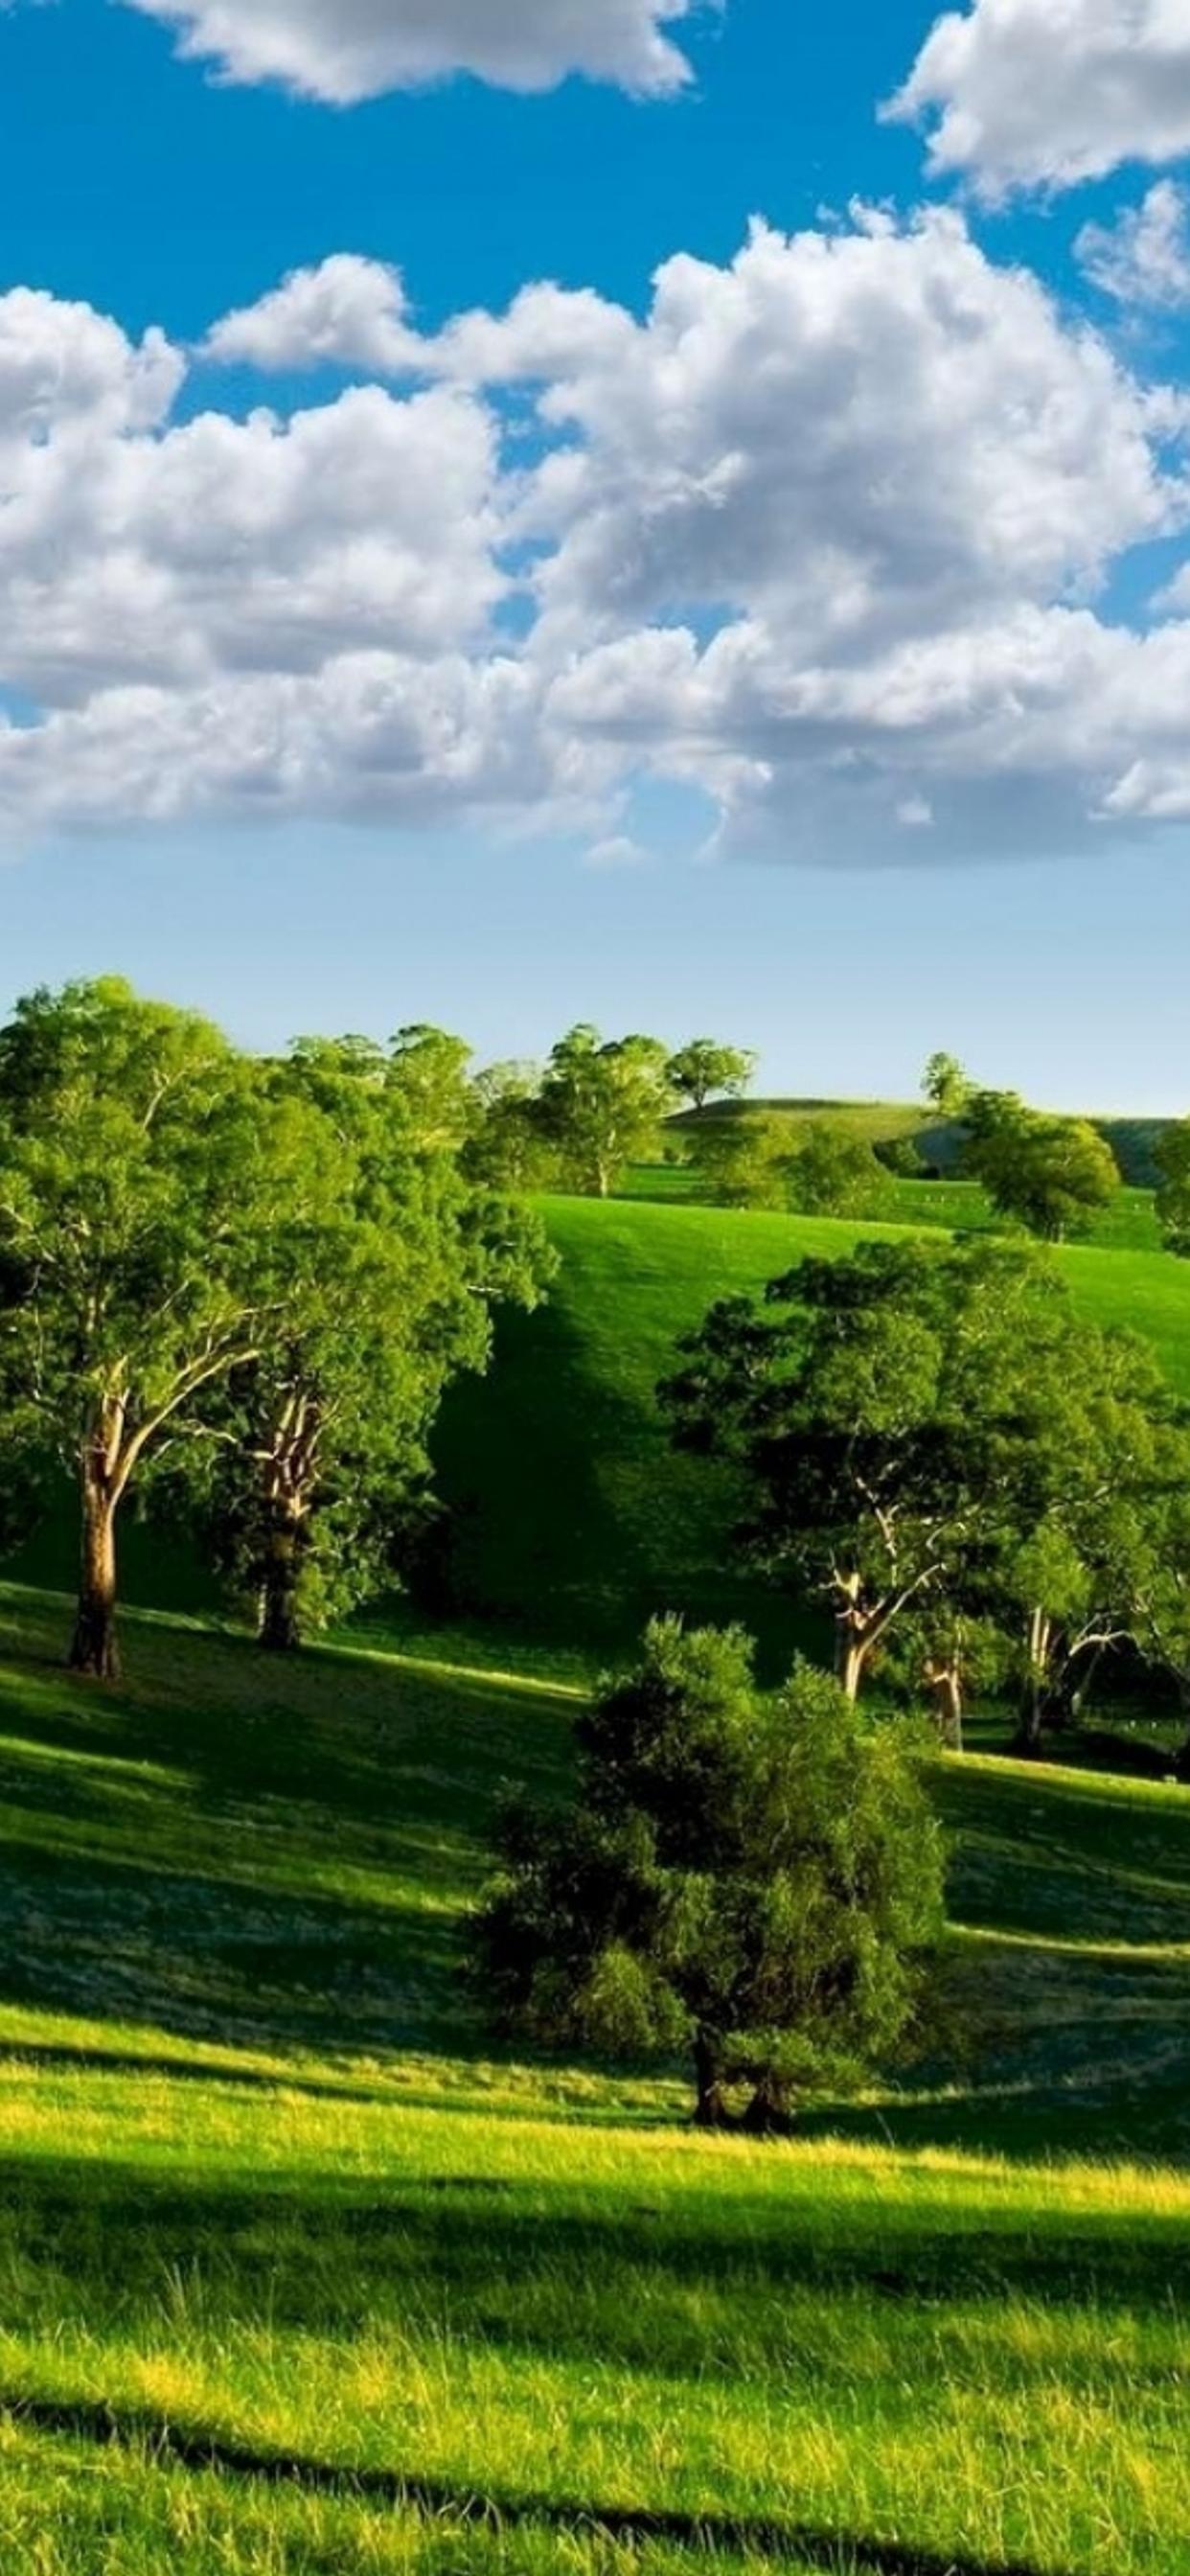 Green nature - trees on the field and beautiful blue sky